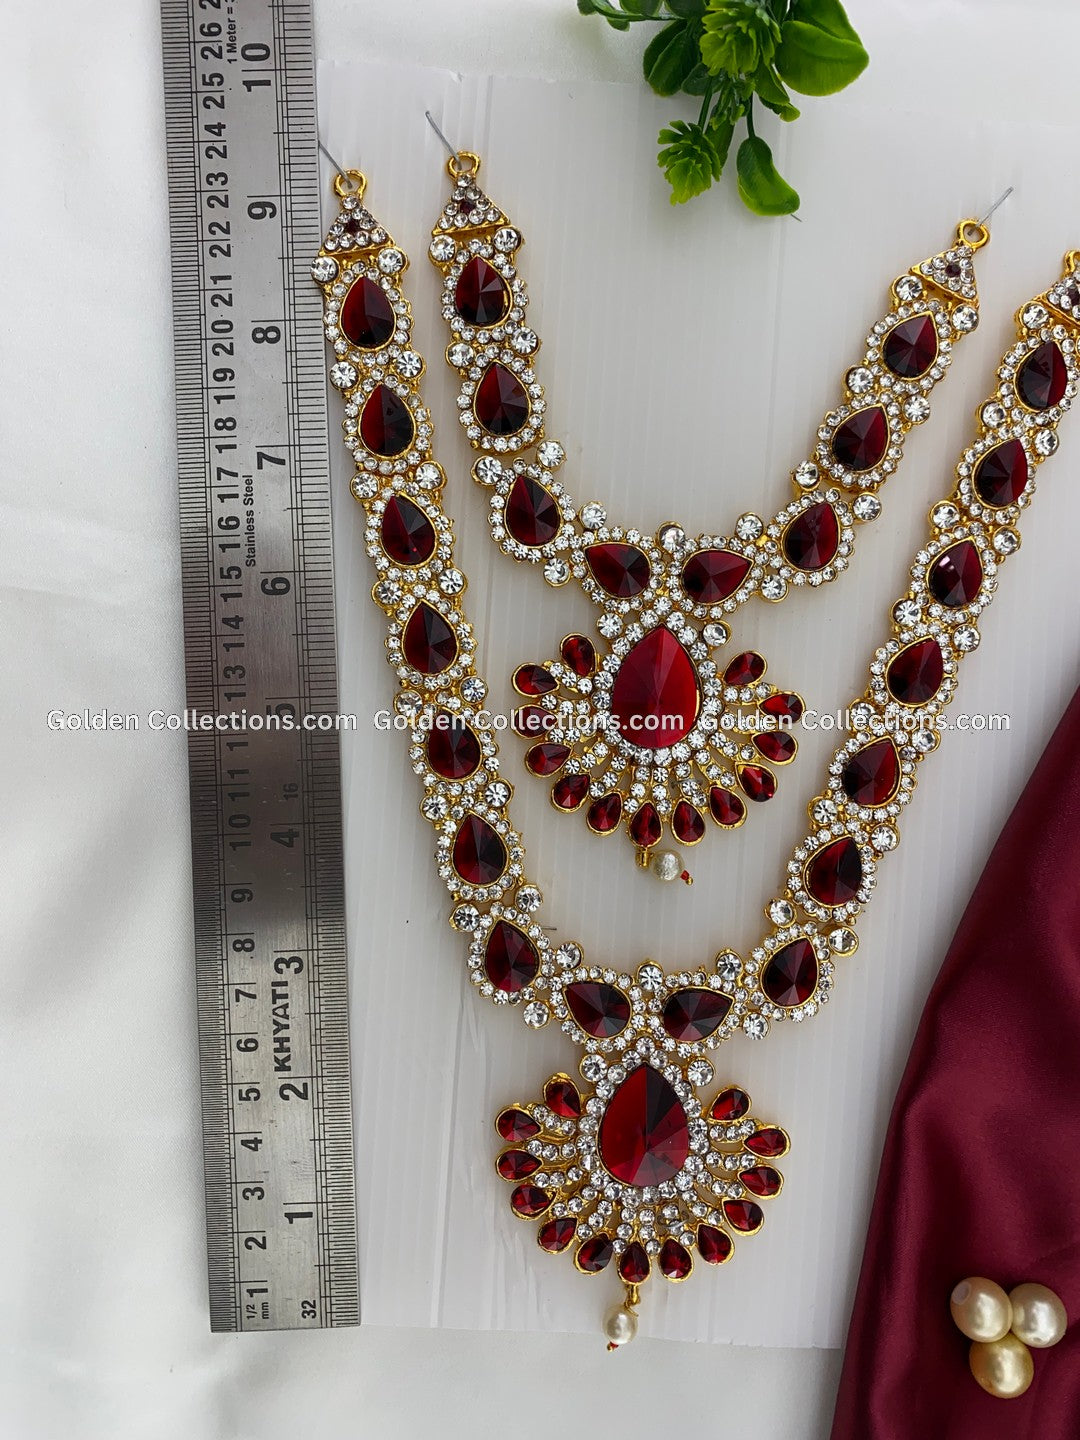 Shop now for Deity Jewellery - GoldenCollections DSN-039 2